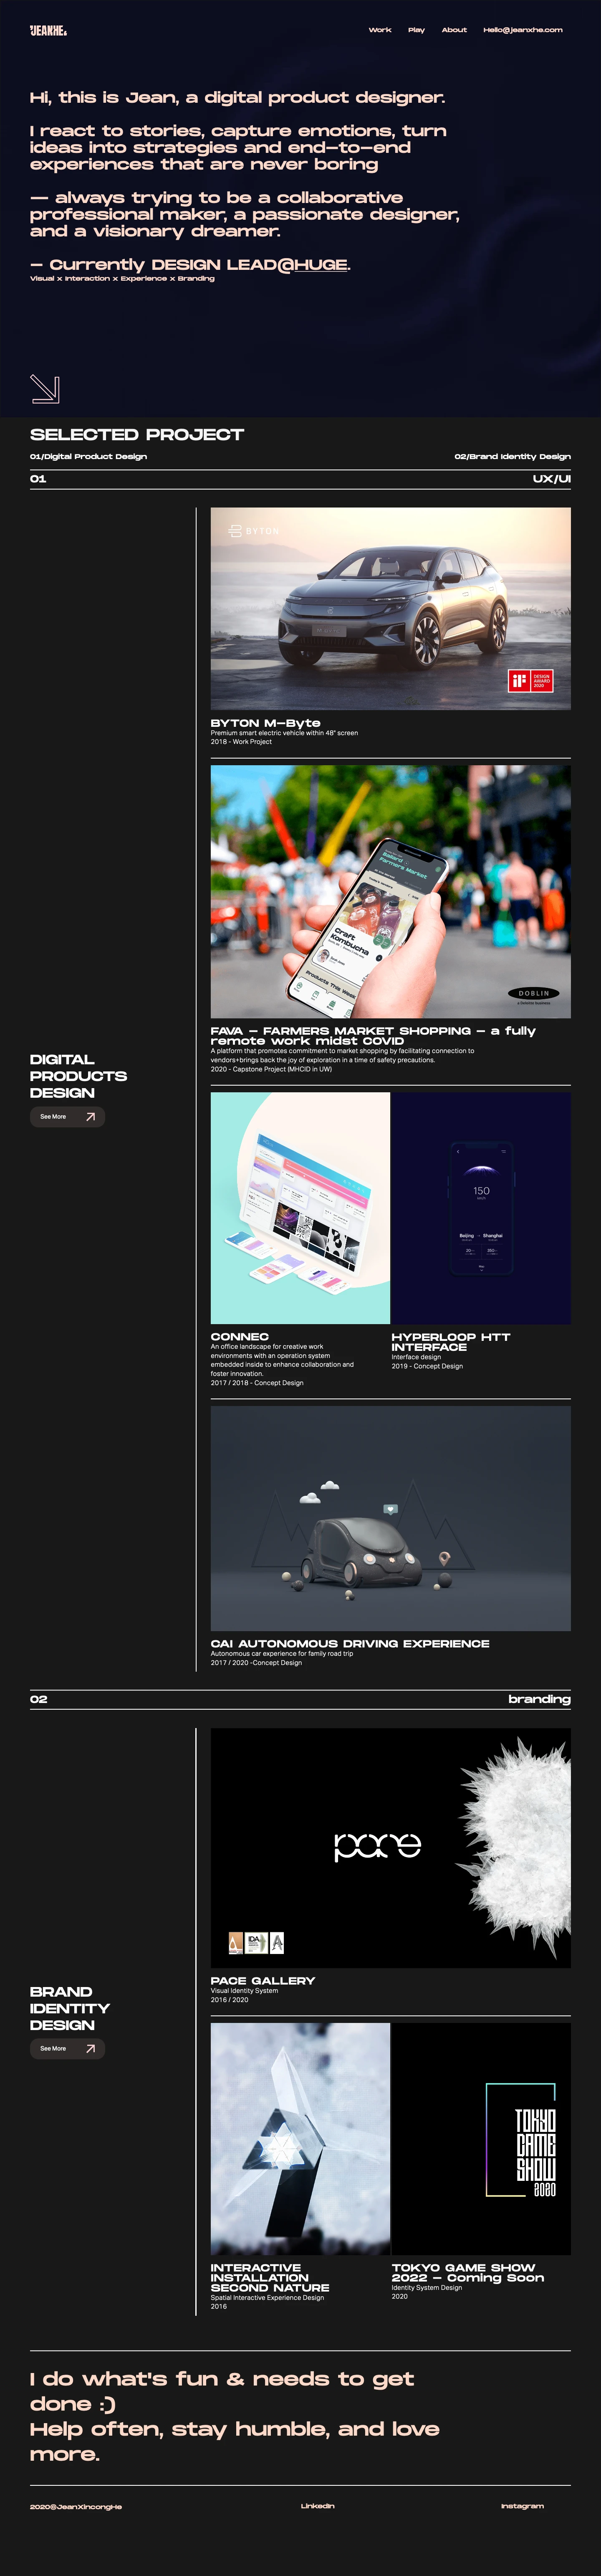 Jean Xincong He Landing Page Example: Jean Xincong He, a digital product designer. React to stories, capture emotions, turn ideas into strategies, and end-to-end experiences that never be boring.